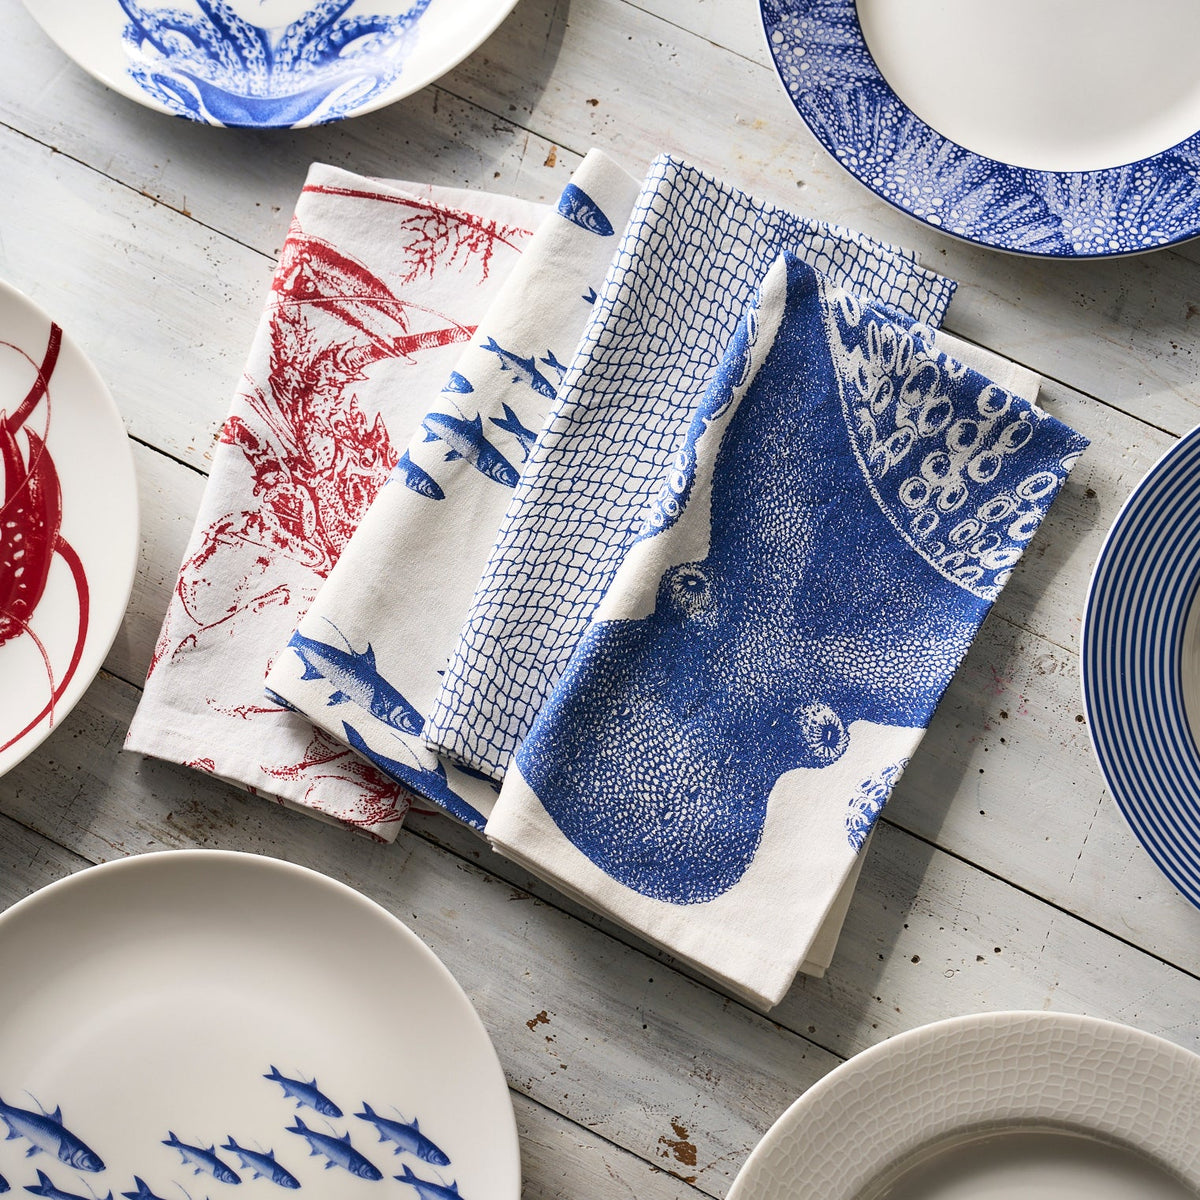 100% cotton dinner napkins from Caskata in prints Lucy, Catch, School of Fish and Red Lobsters.